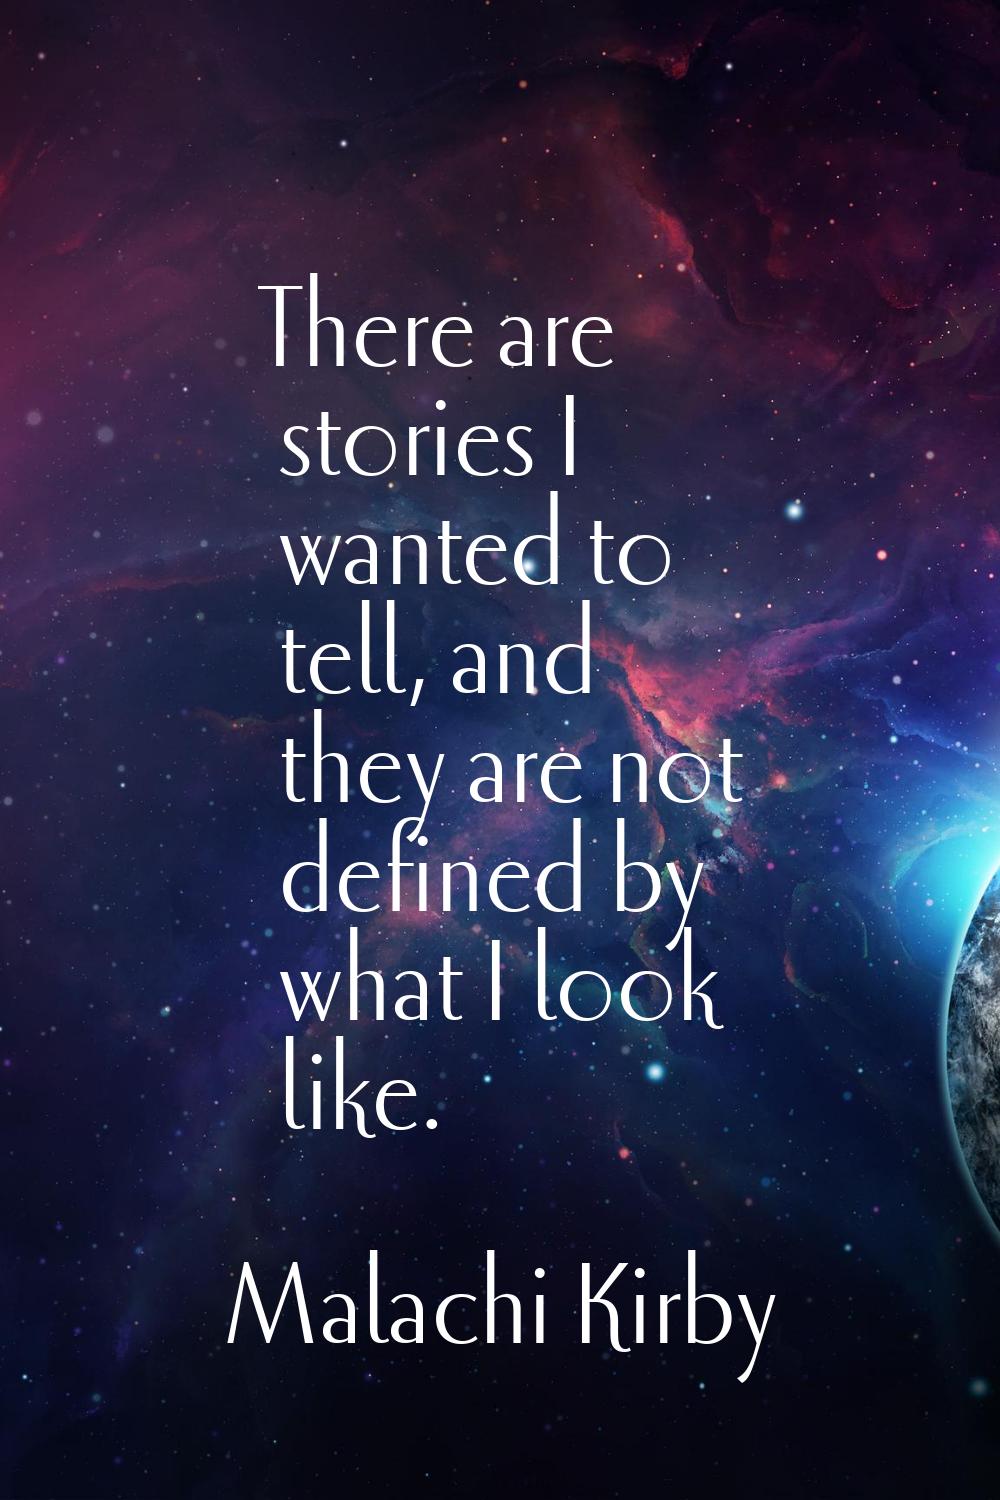 There are stories I wanted to tell, and they are not defined by what I look like.